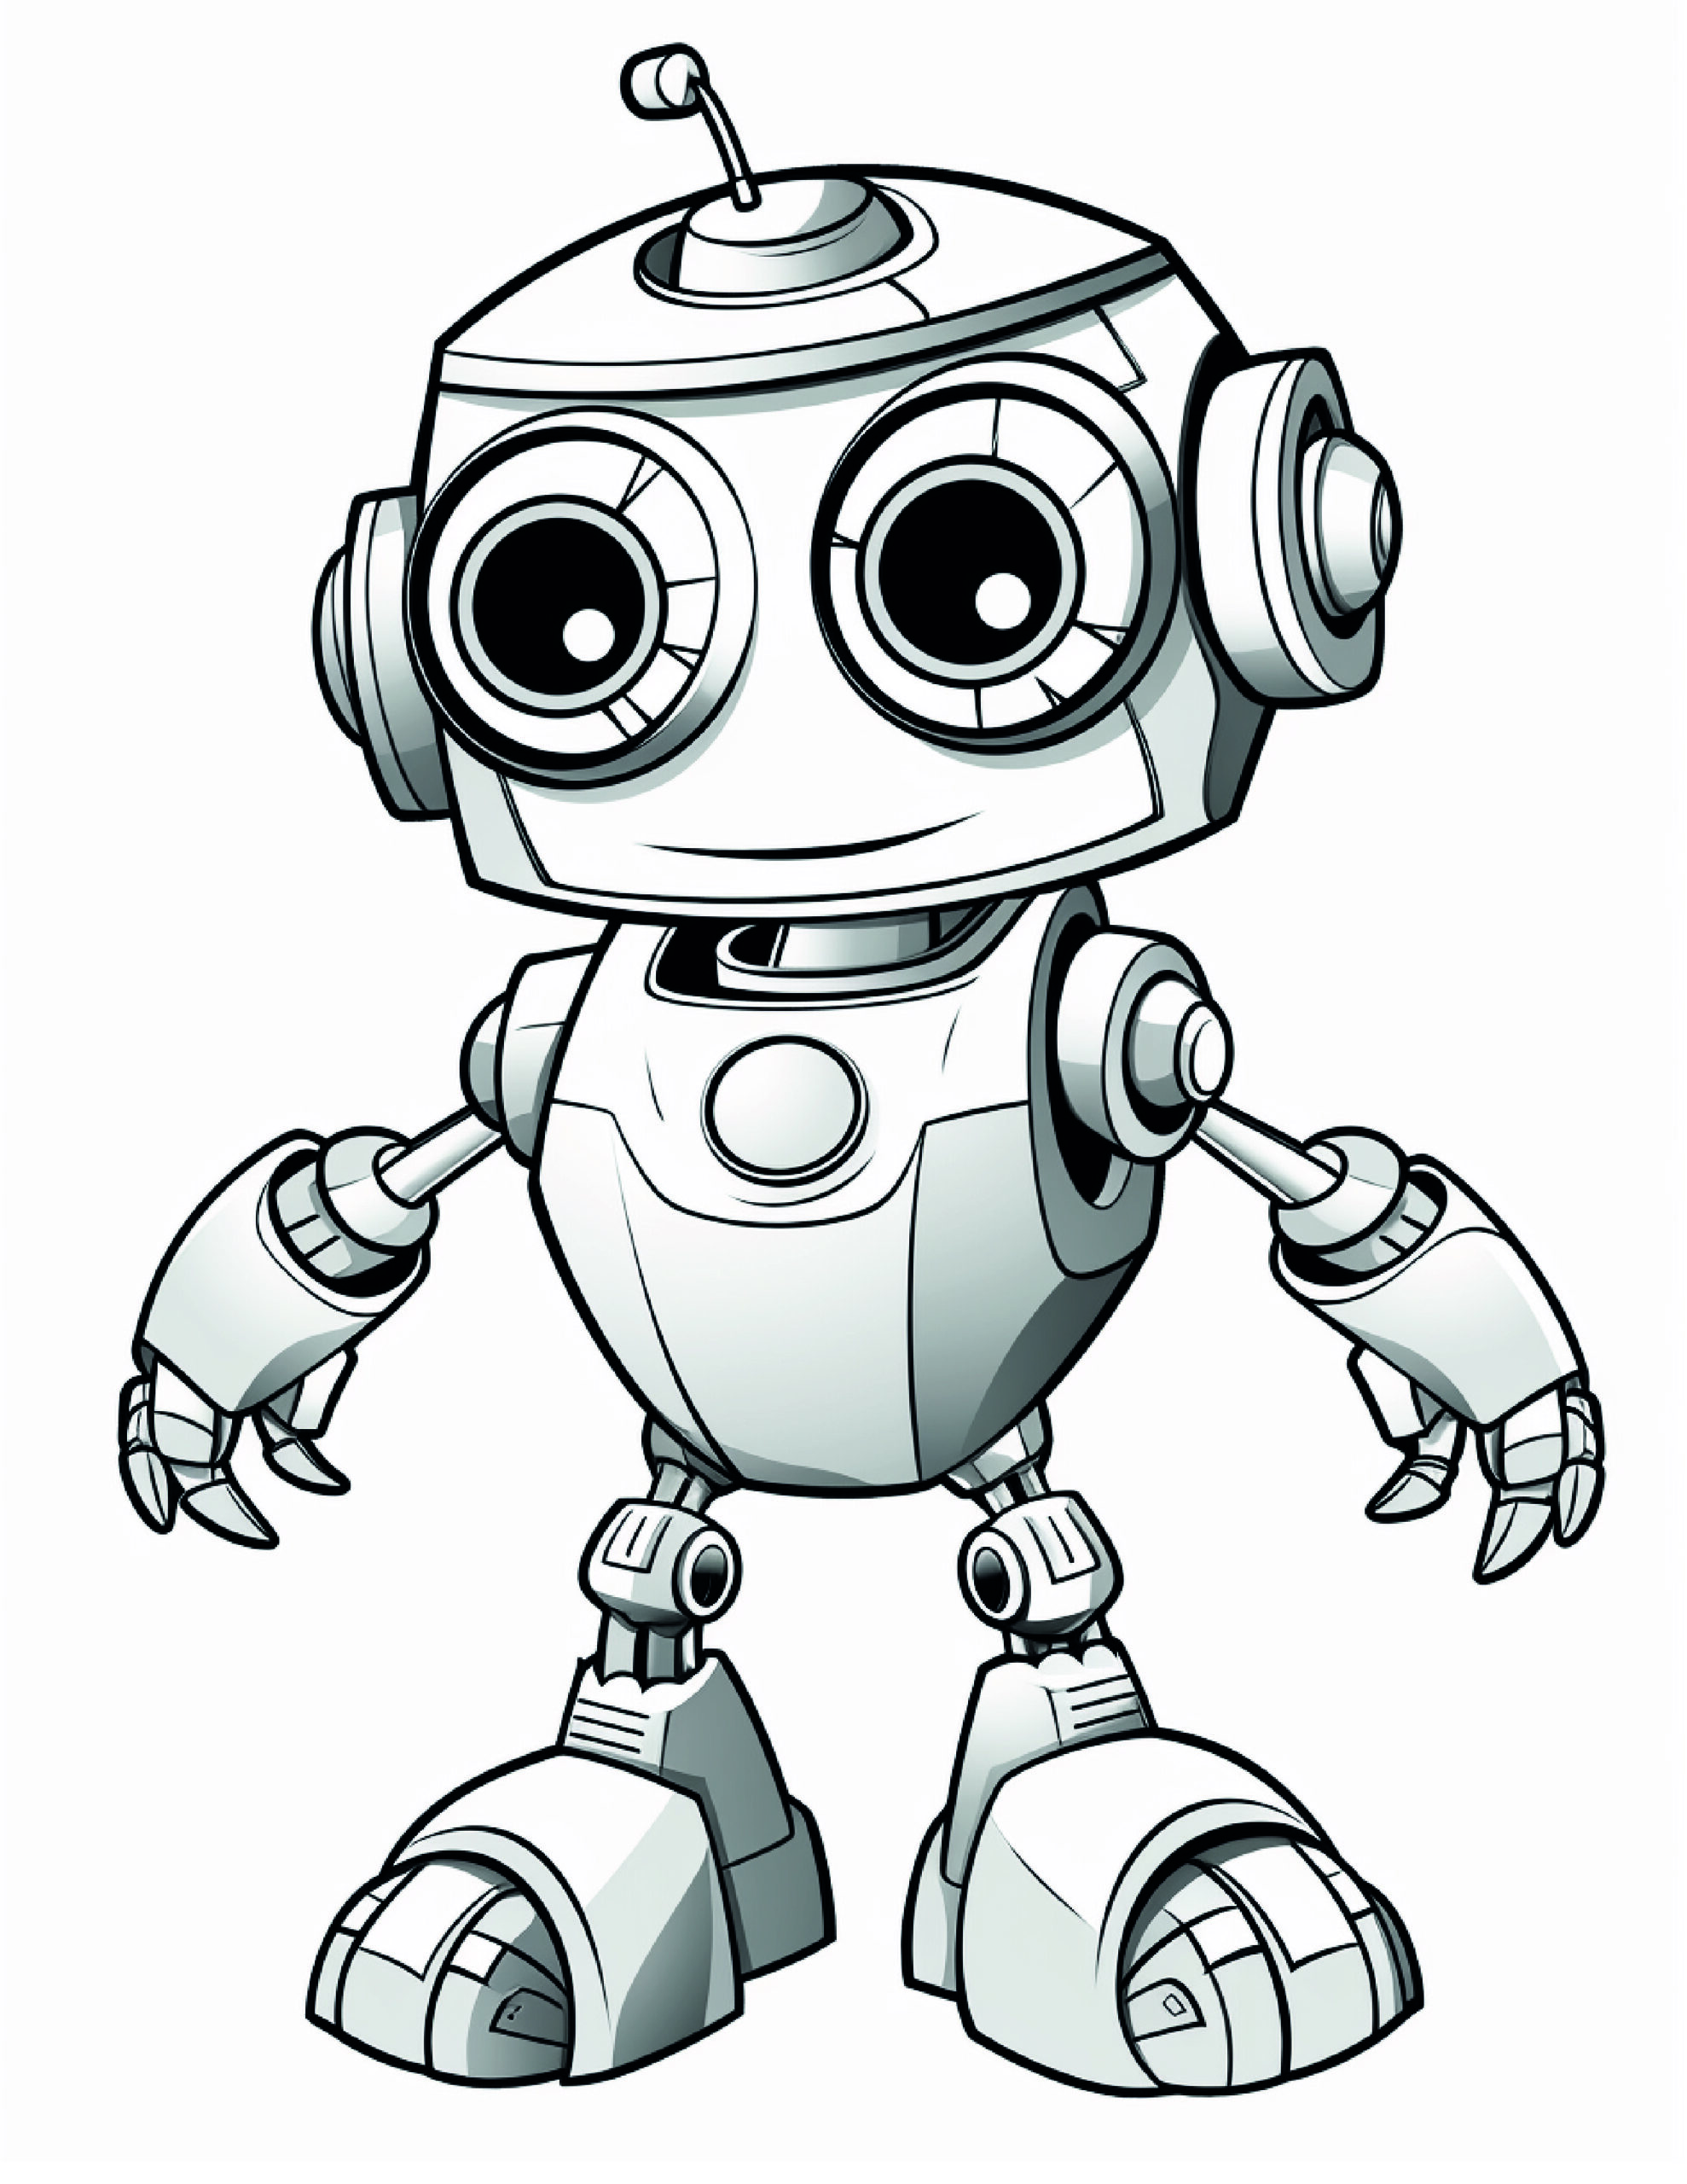 Robot Coloring Page 5 - A line drawing of a friendly robot. 